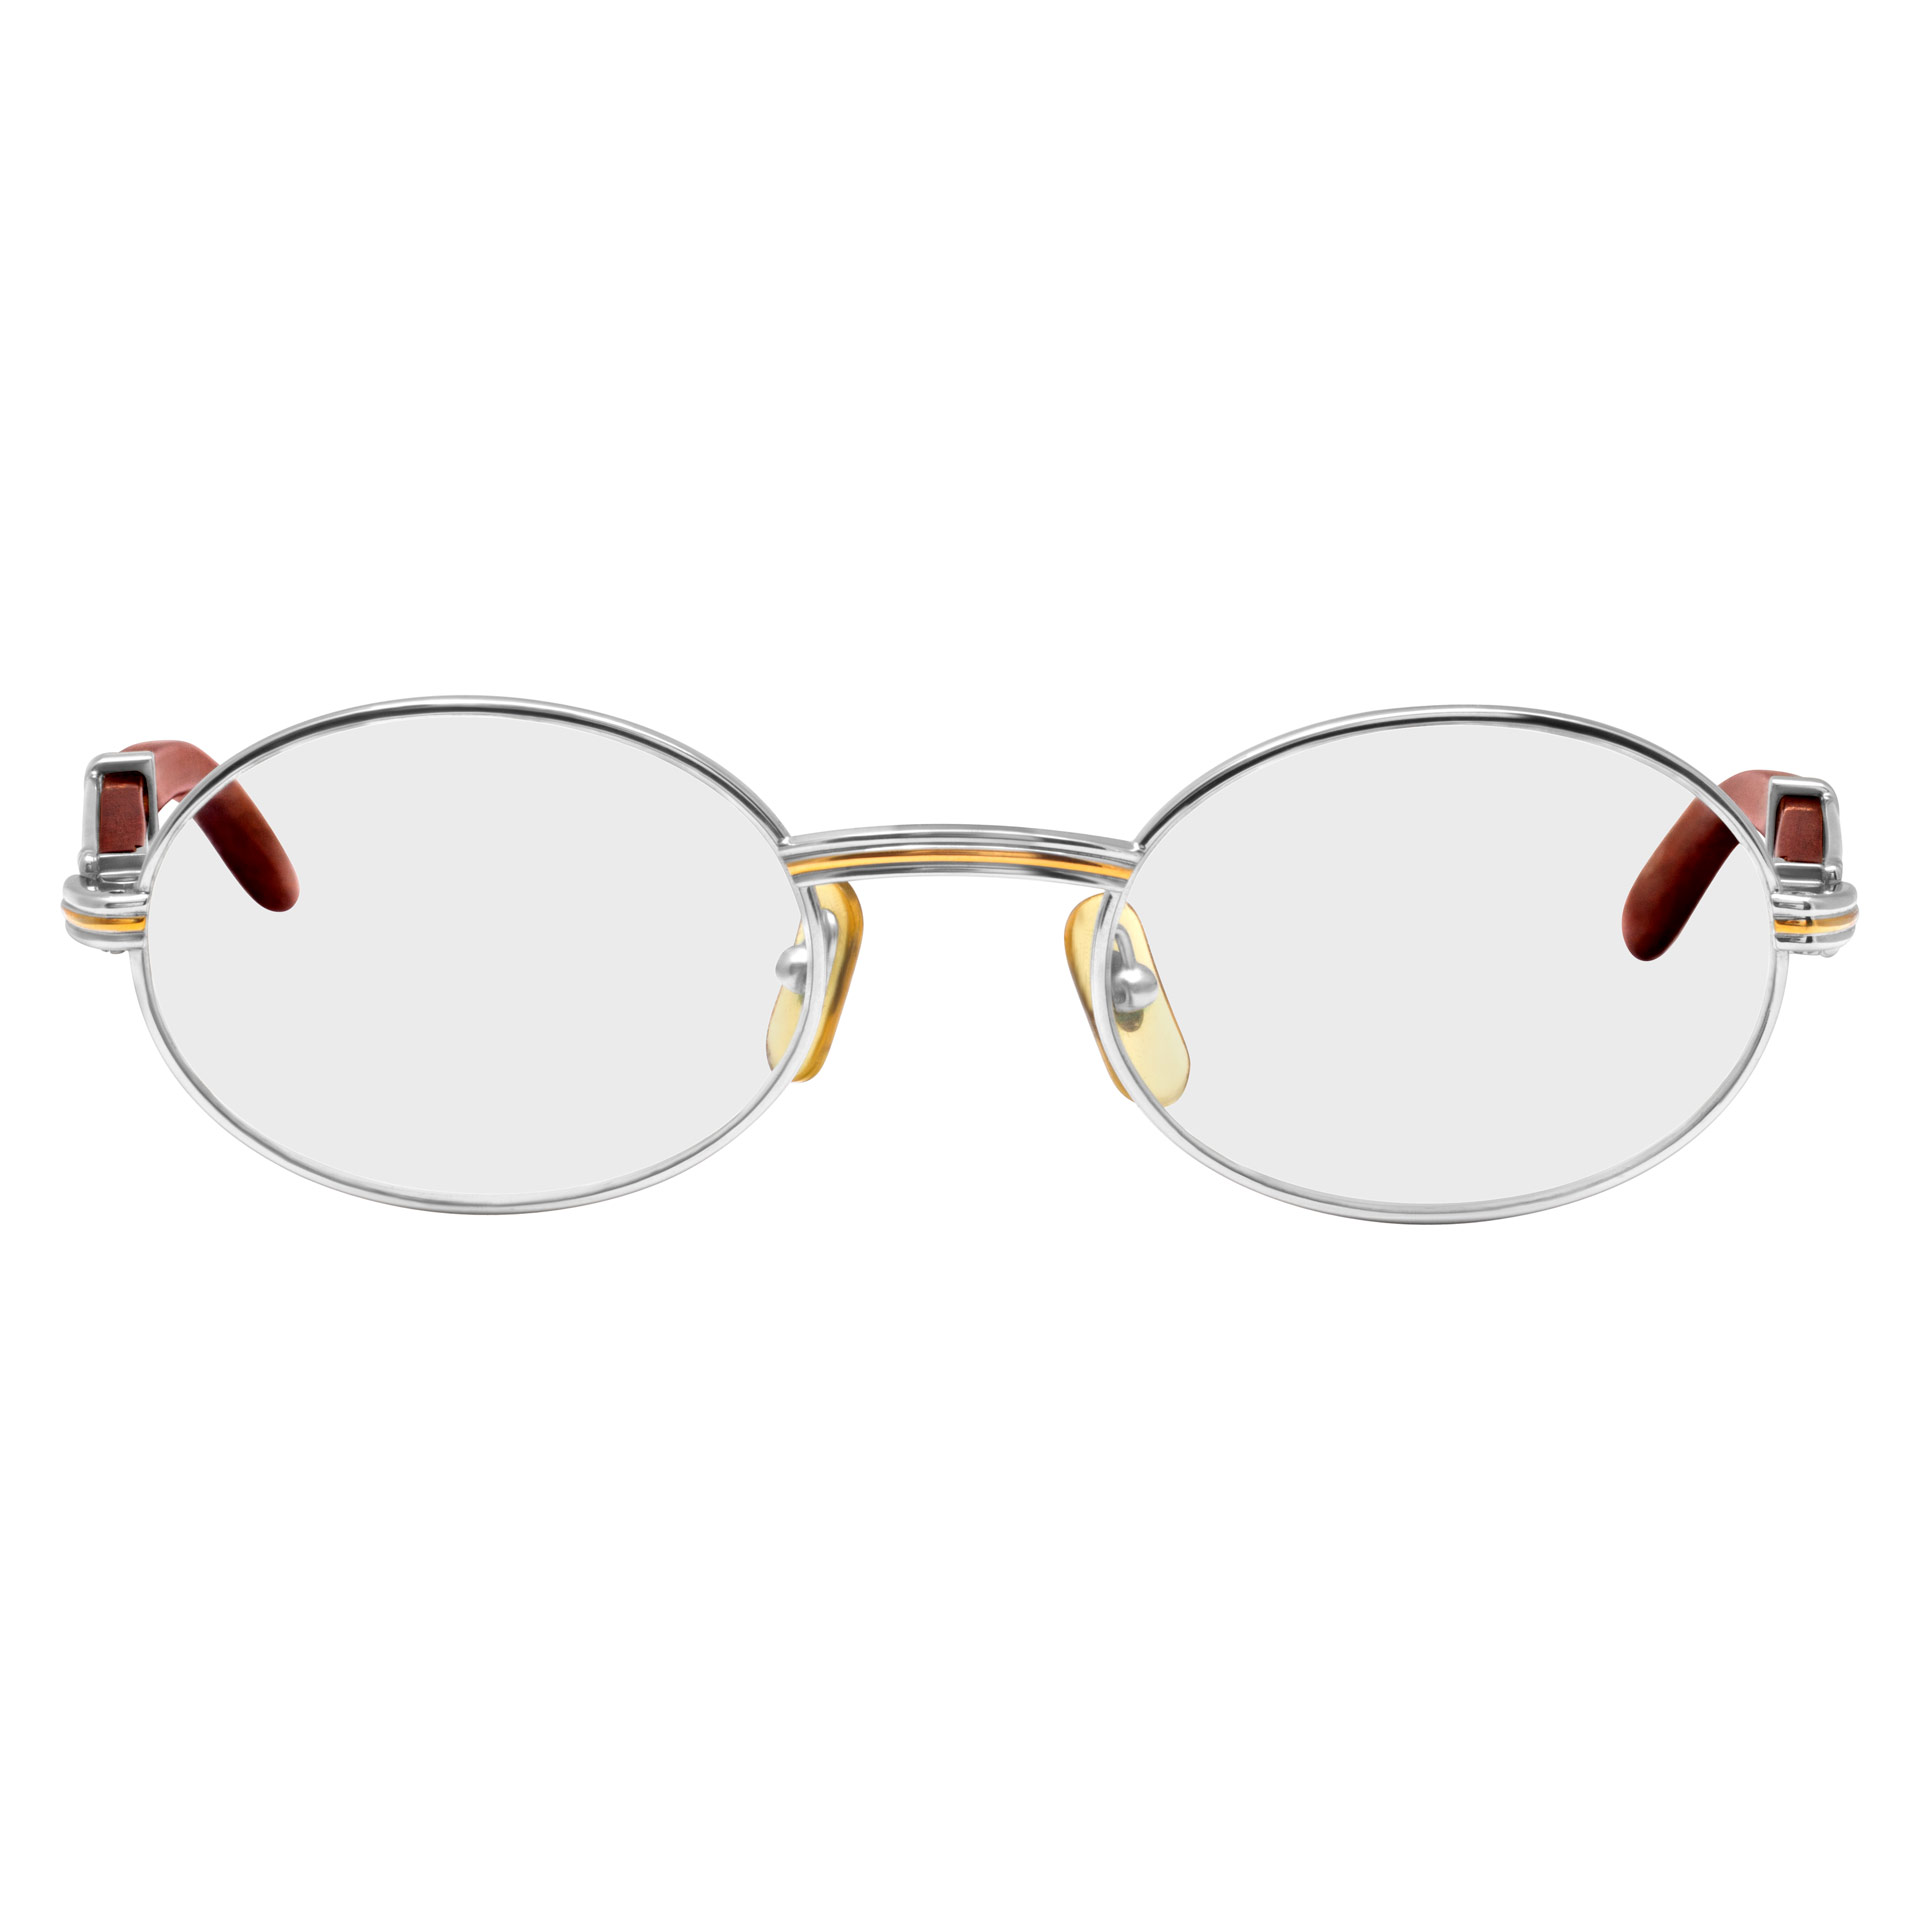 Cartier Trinity glasses with wood stems